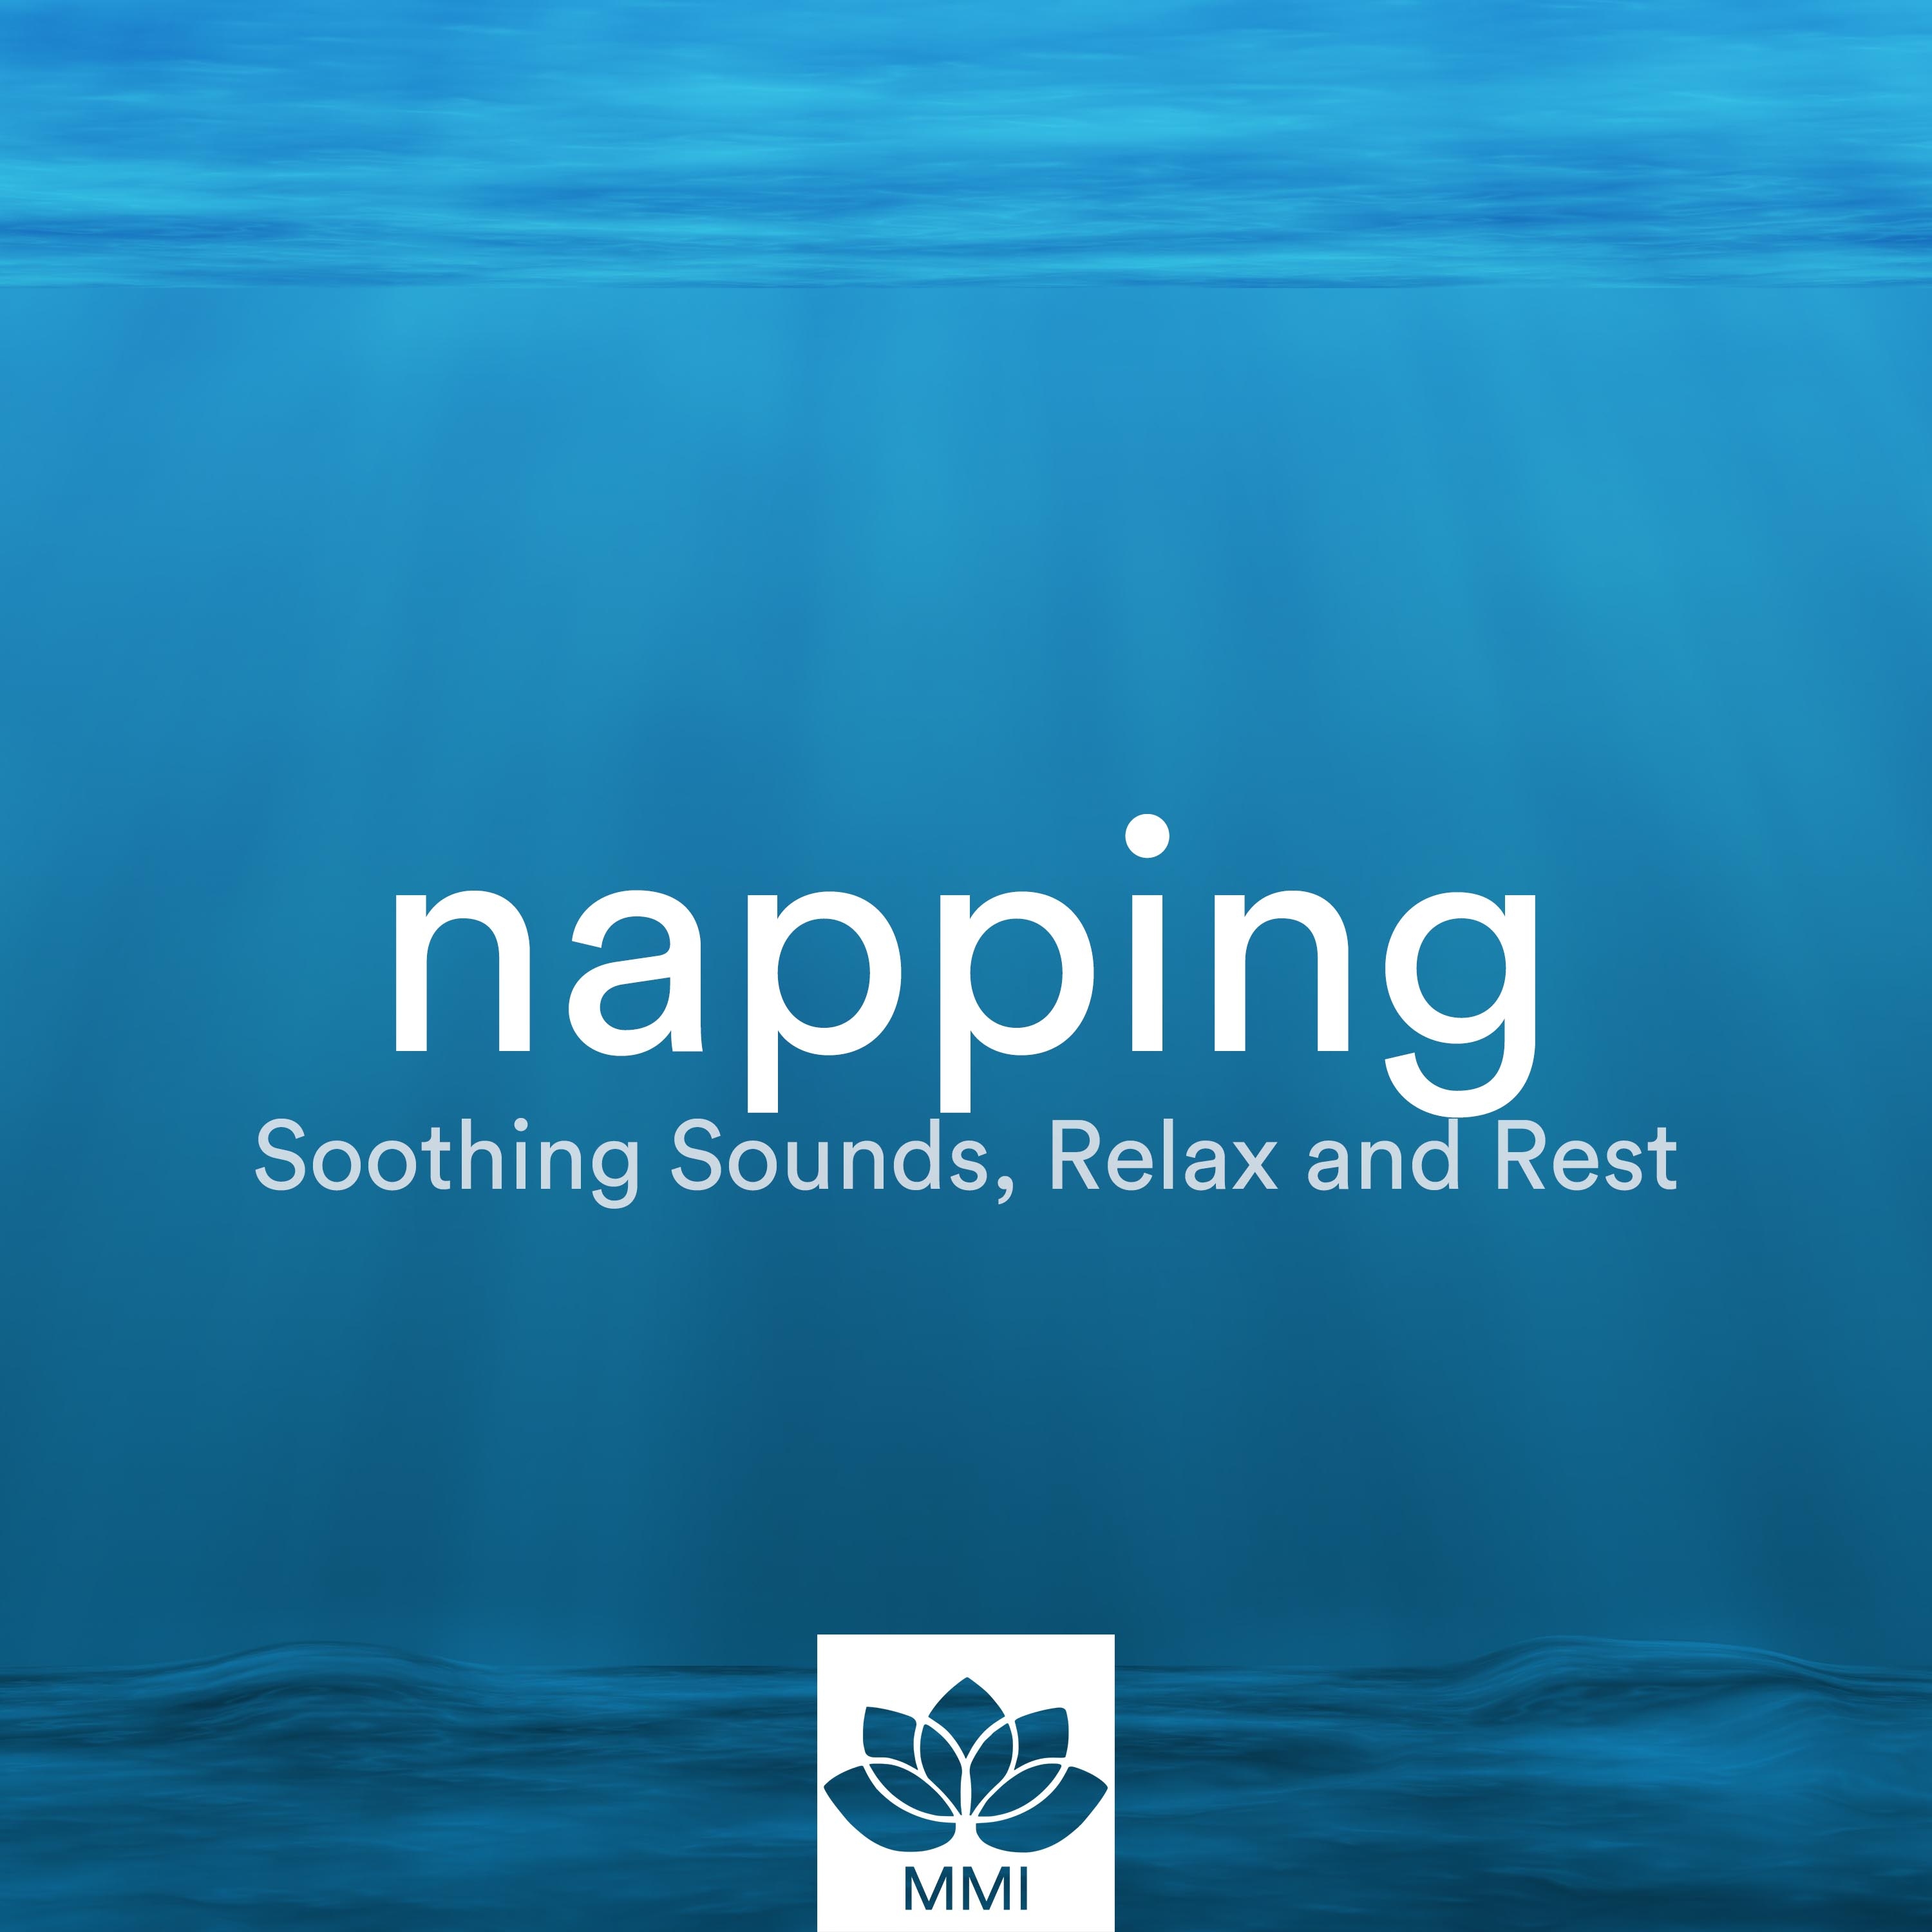 Napping - Soothing Sounds, Relax and Rest, Calming Music, Natural Sleep Aid, Relaxing Piano Music